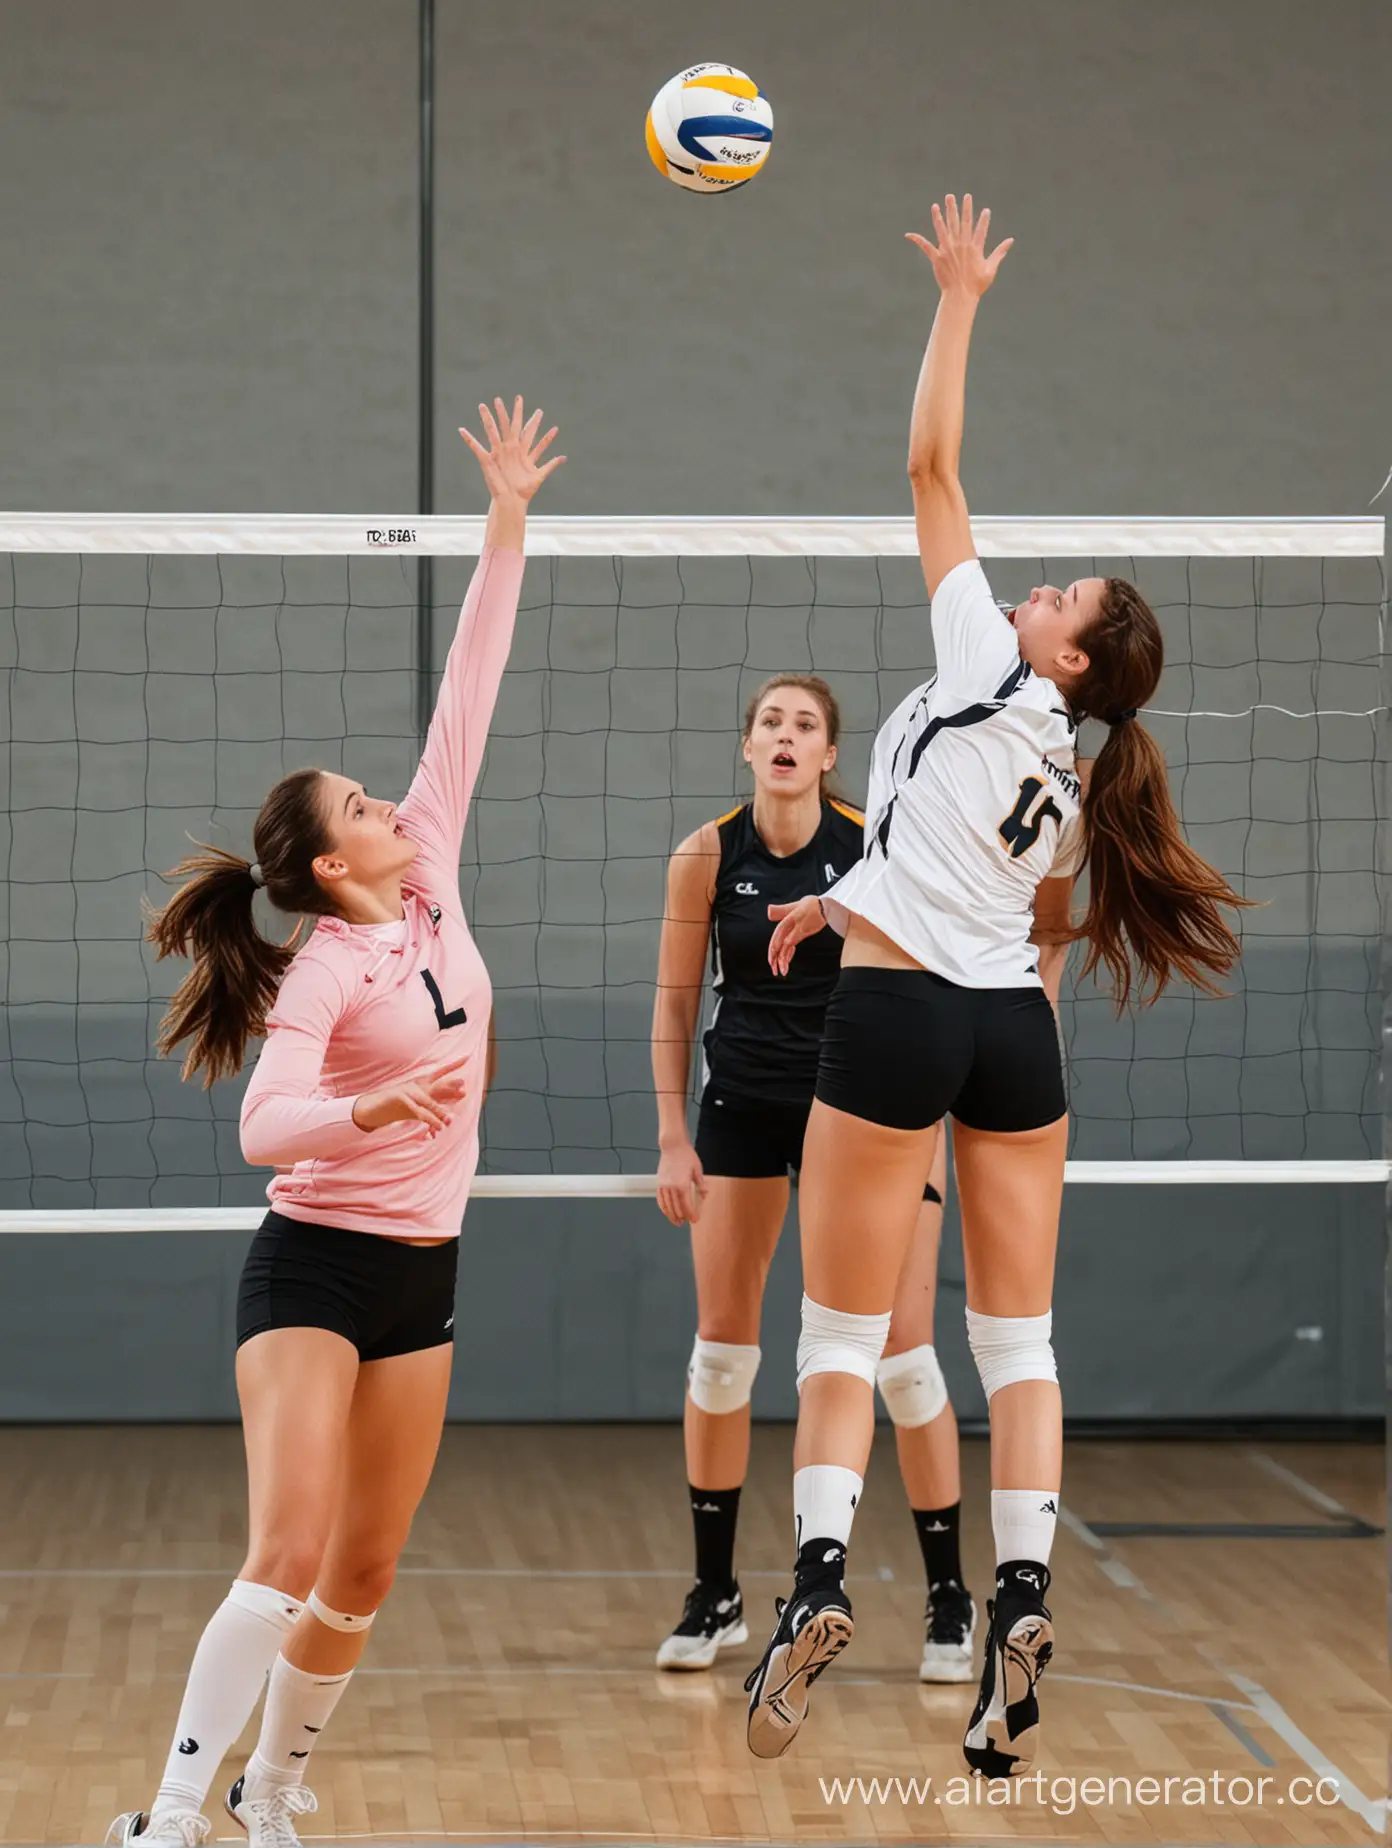 A volleyball man player spiking while being blocked by a girl blocker